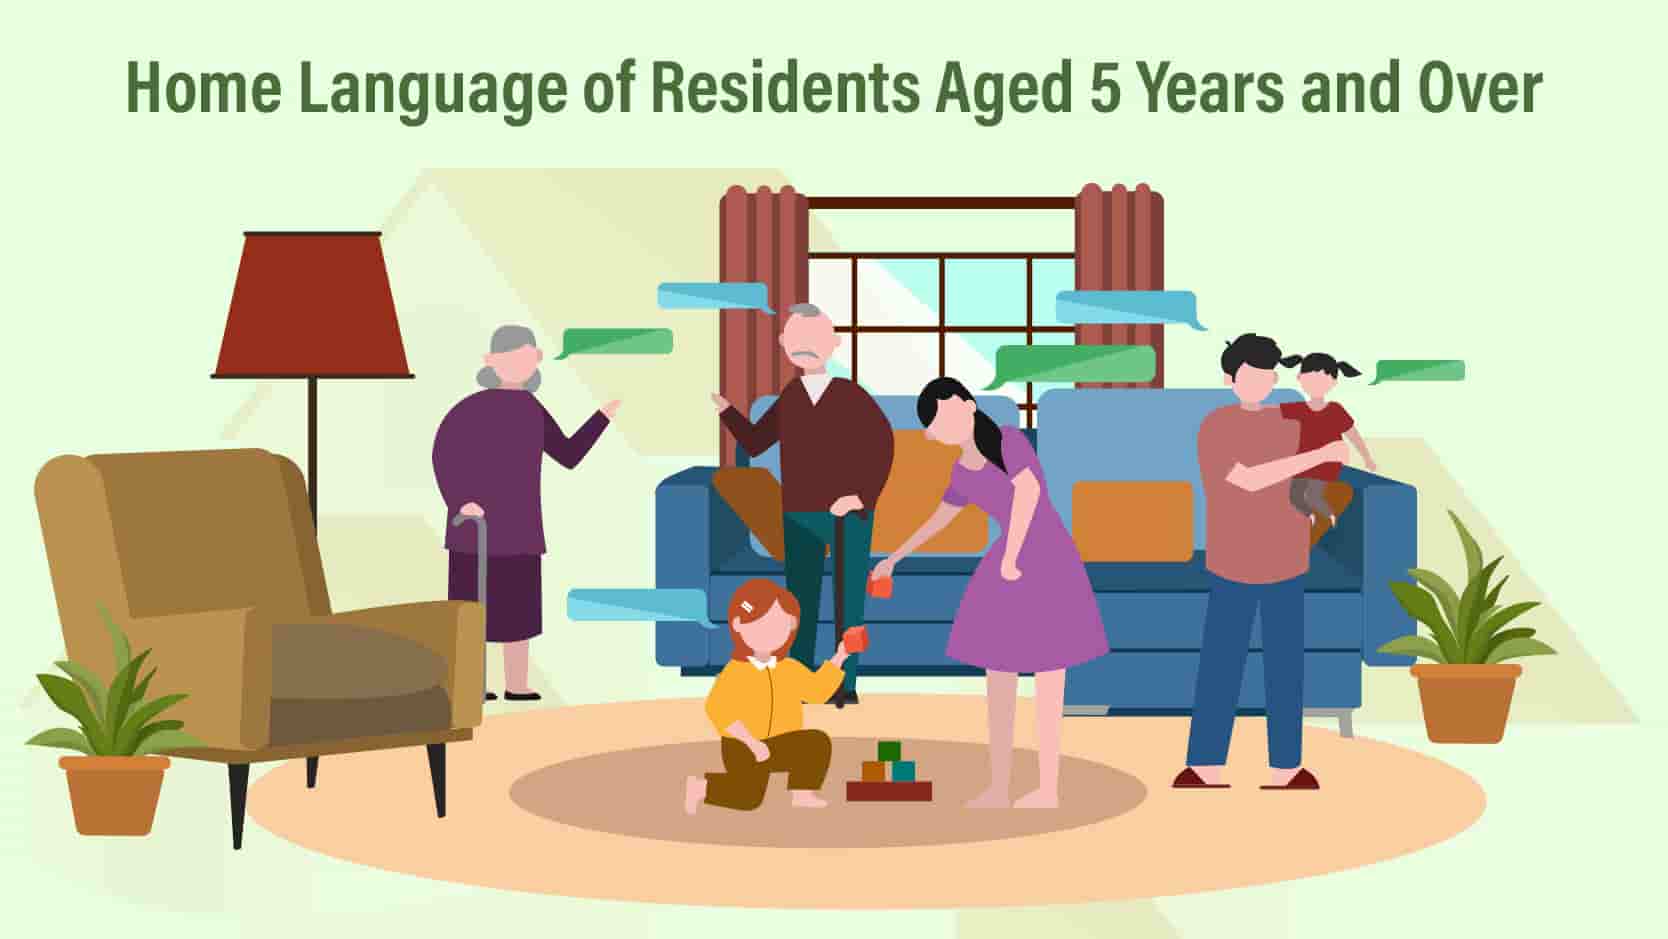 Home Language of Residents Aged 5 Years and Over Dashboard